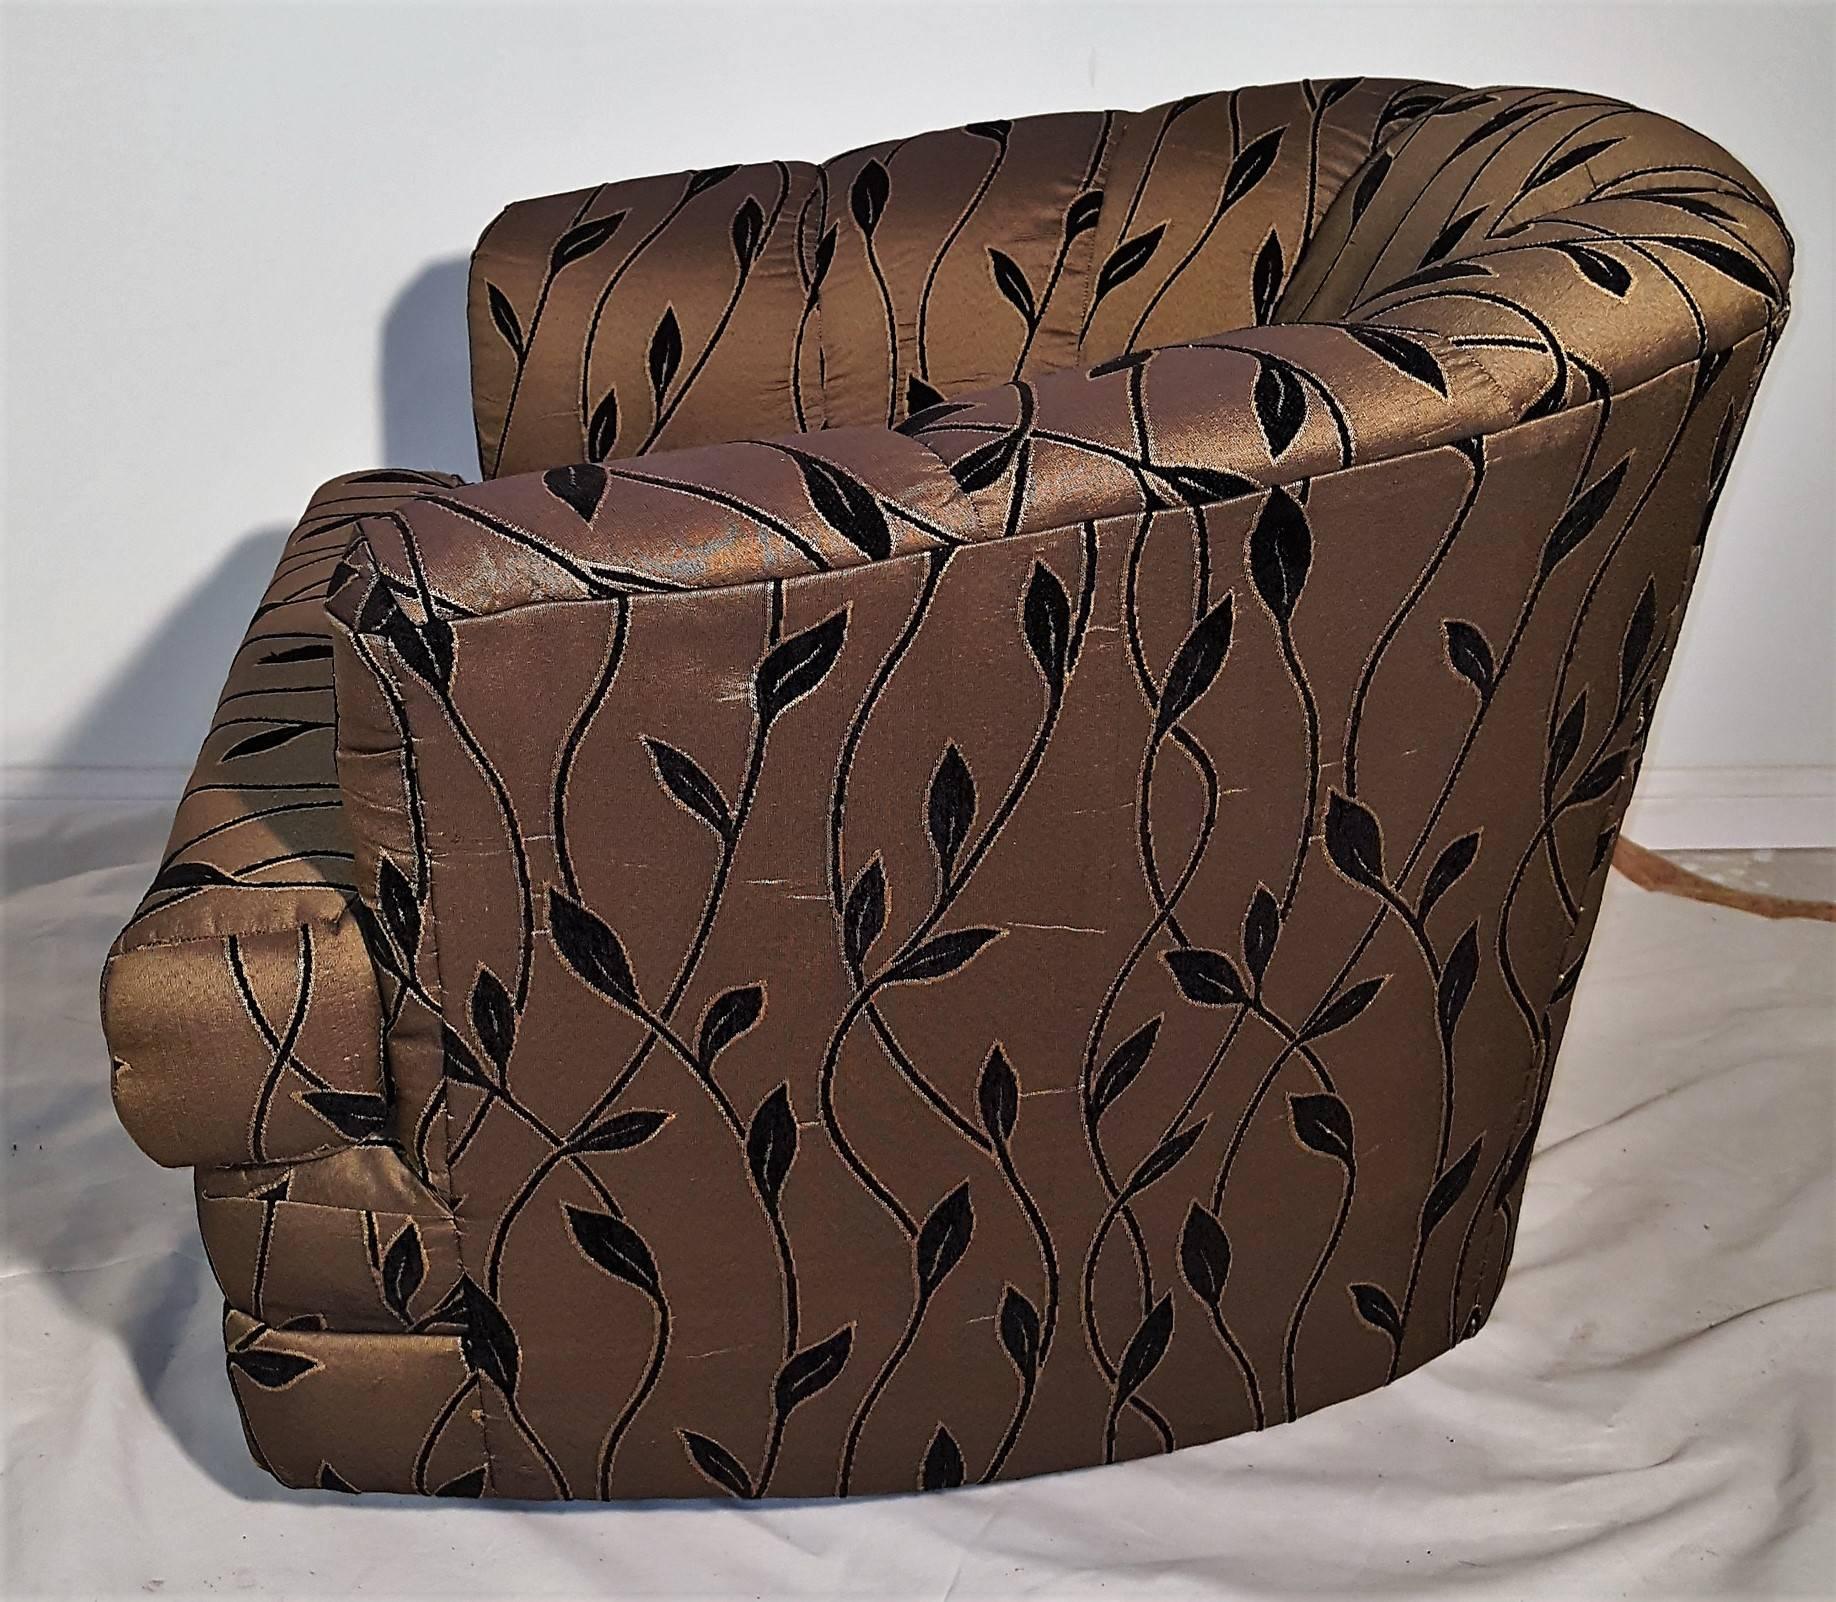 Pair swivel barrel chairs attributed to Milo Baughman. Comfort level enhanced by the Classic channel back, t-cushion and rounded arms. Covered in a tan cotton fabric with vines leaves. Perfect!